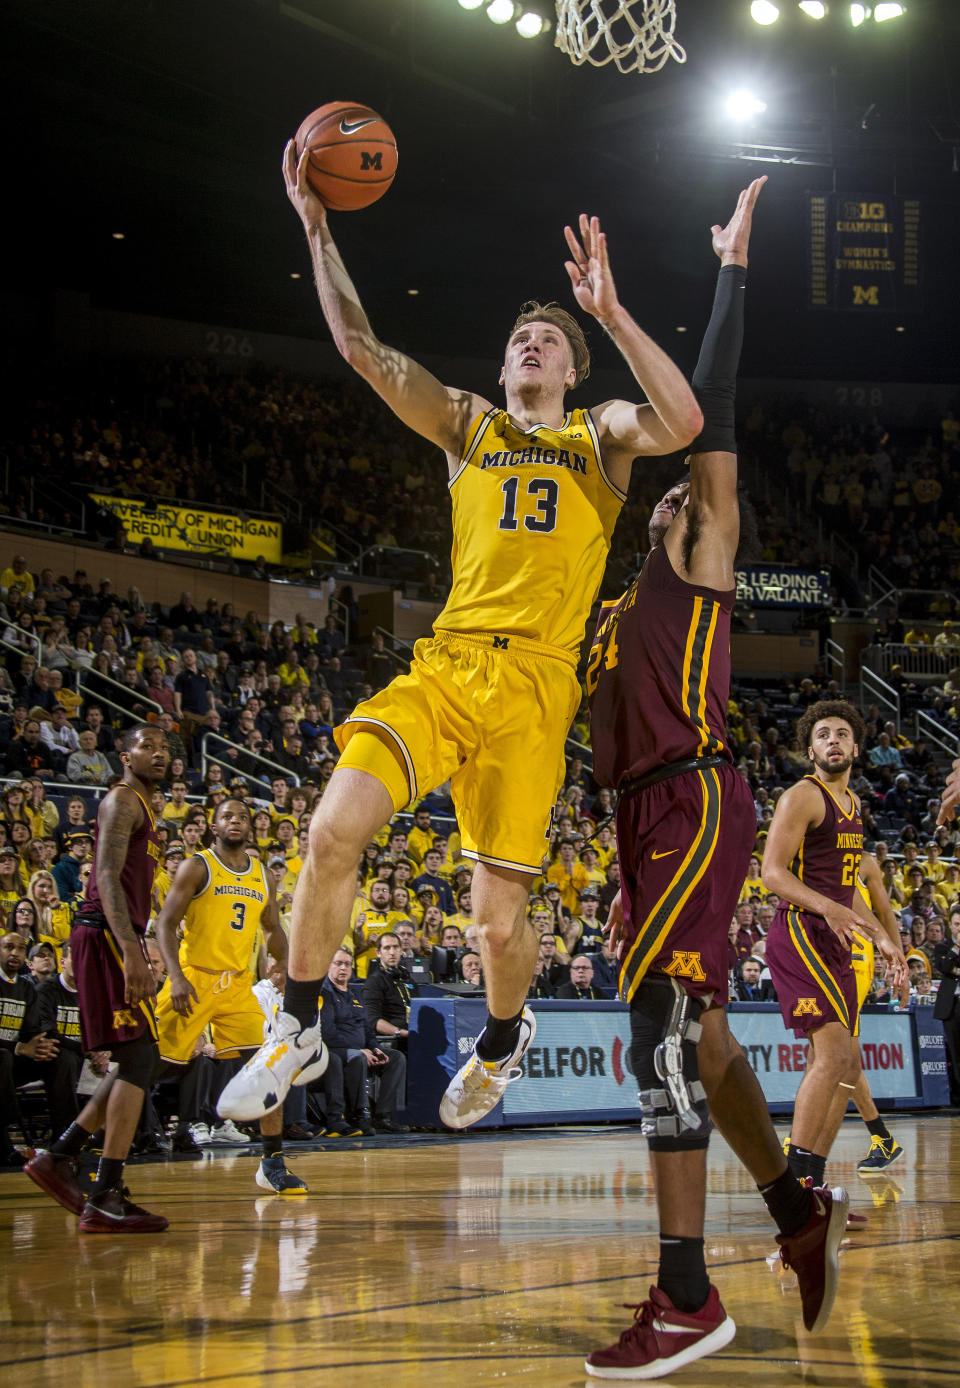 Michigan forward Ignas Brazdeikis (13) goes to the basket, defended by Minnesota forward Eric Curry (24), in the second half of an NCAA college basketball game at Crisler Center in Ann Arbor, Mich., Tuesday, Jan. 22, 2019. Michigan won 59-57. (AP Photo/Tony Ding)